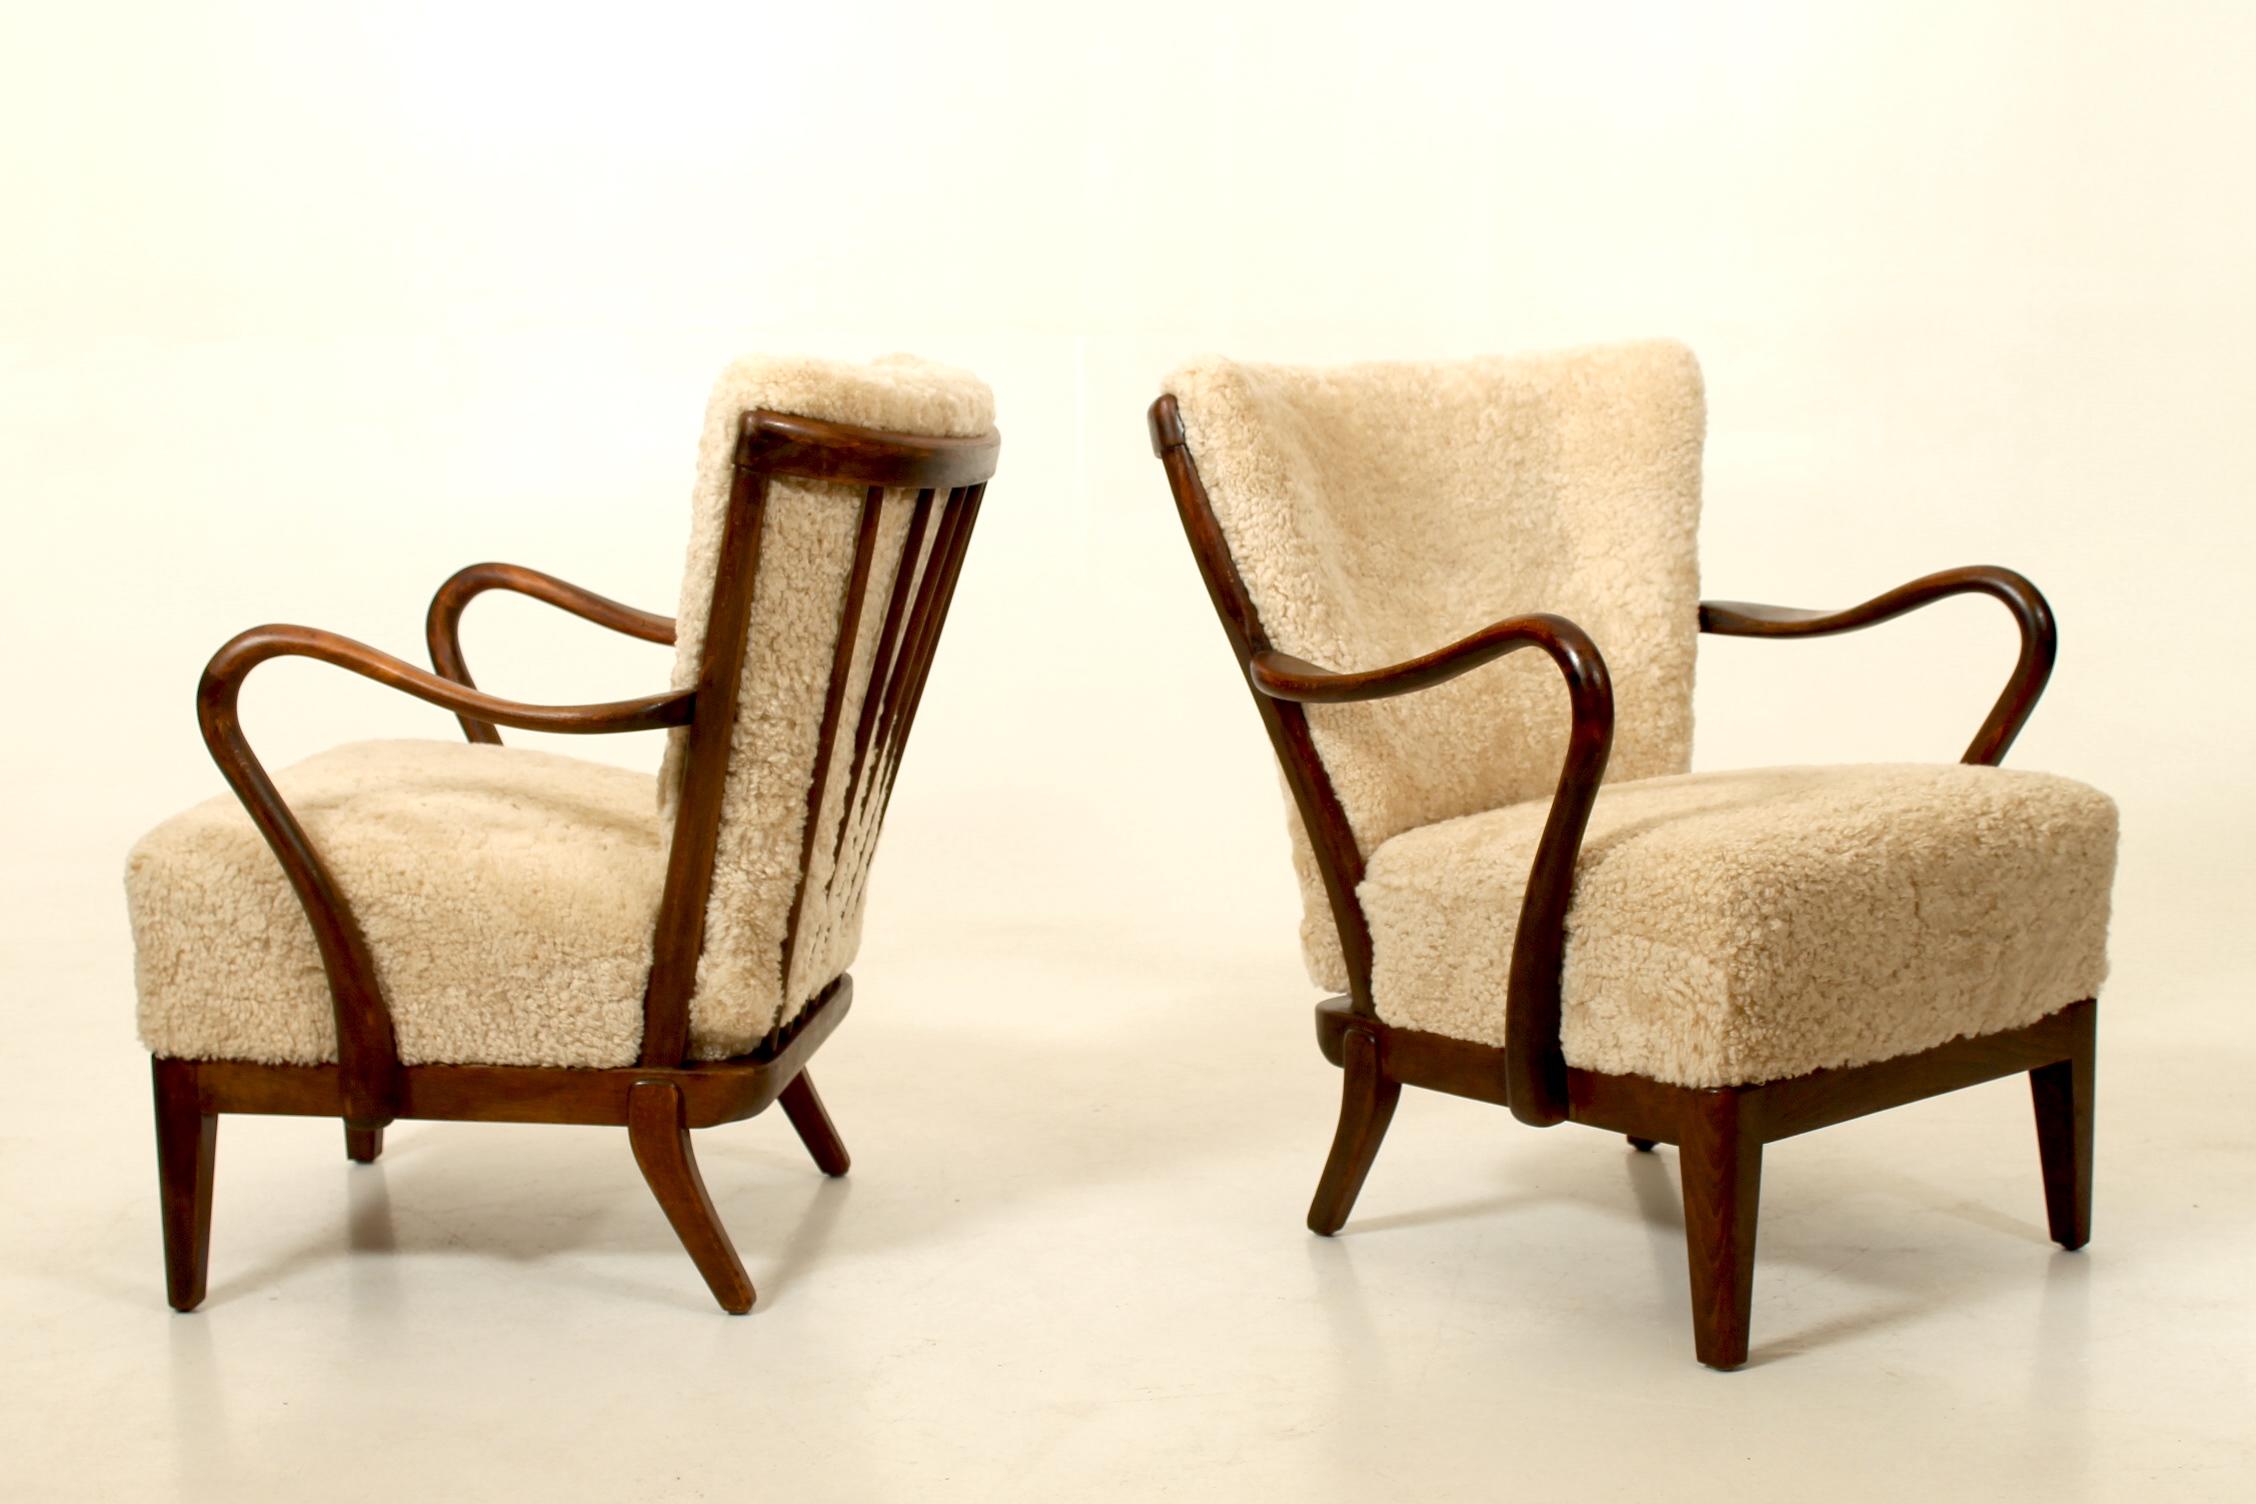 Scandinavian Modern Pair of 1940s lounge chairs by Alfred Christensen, Denmark. For Sale